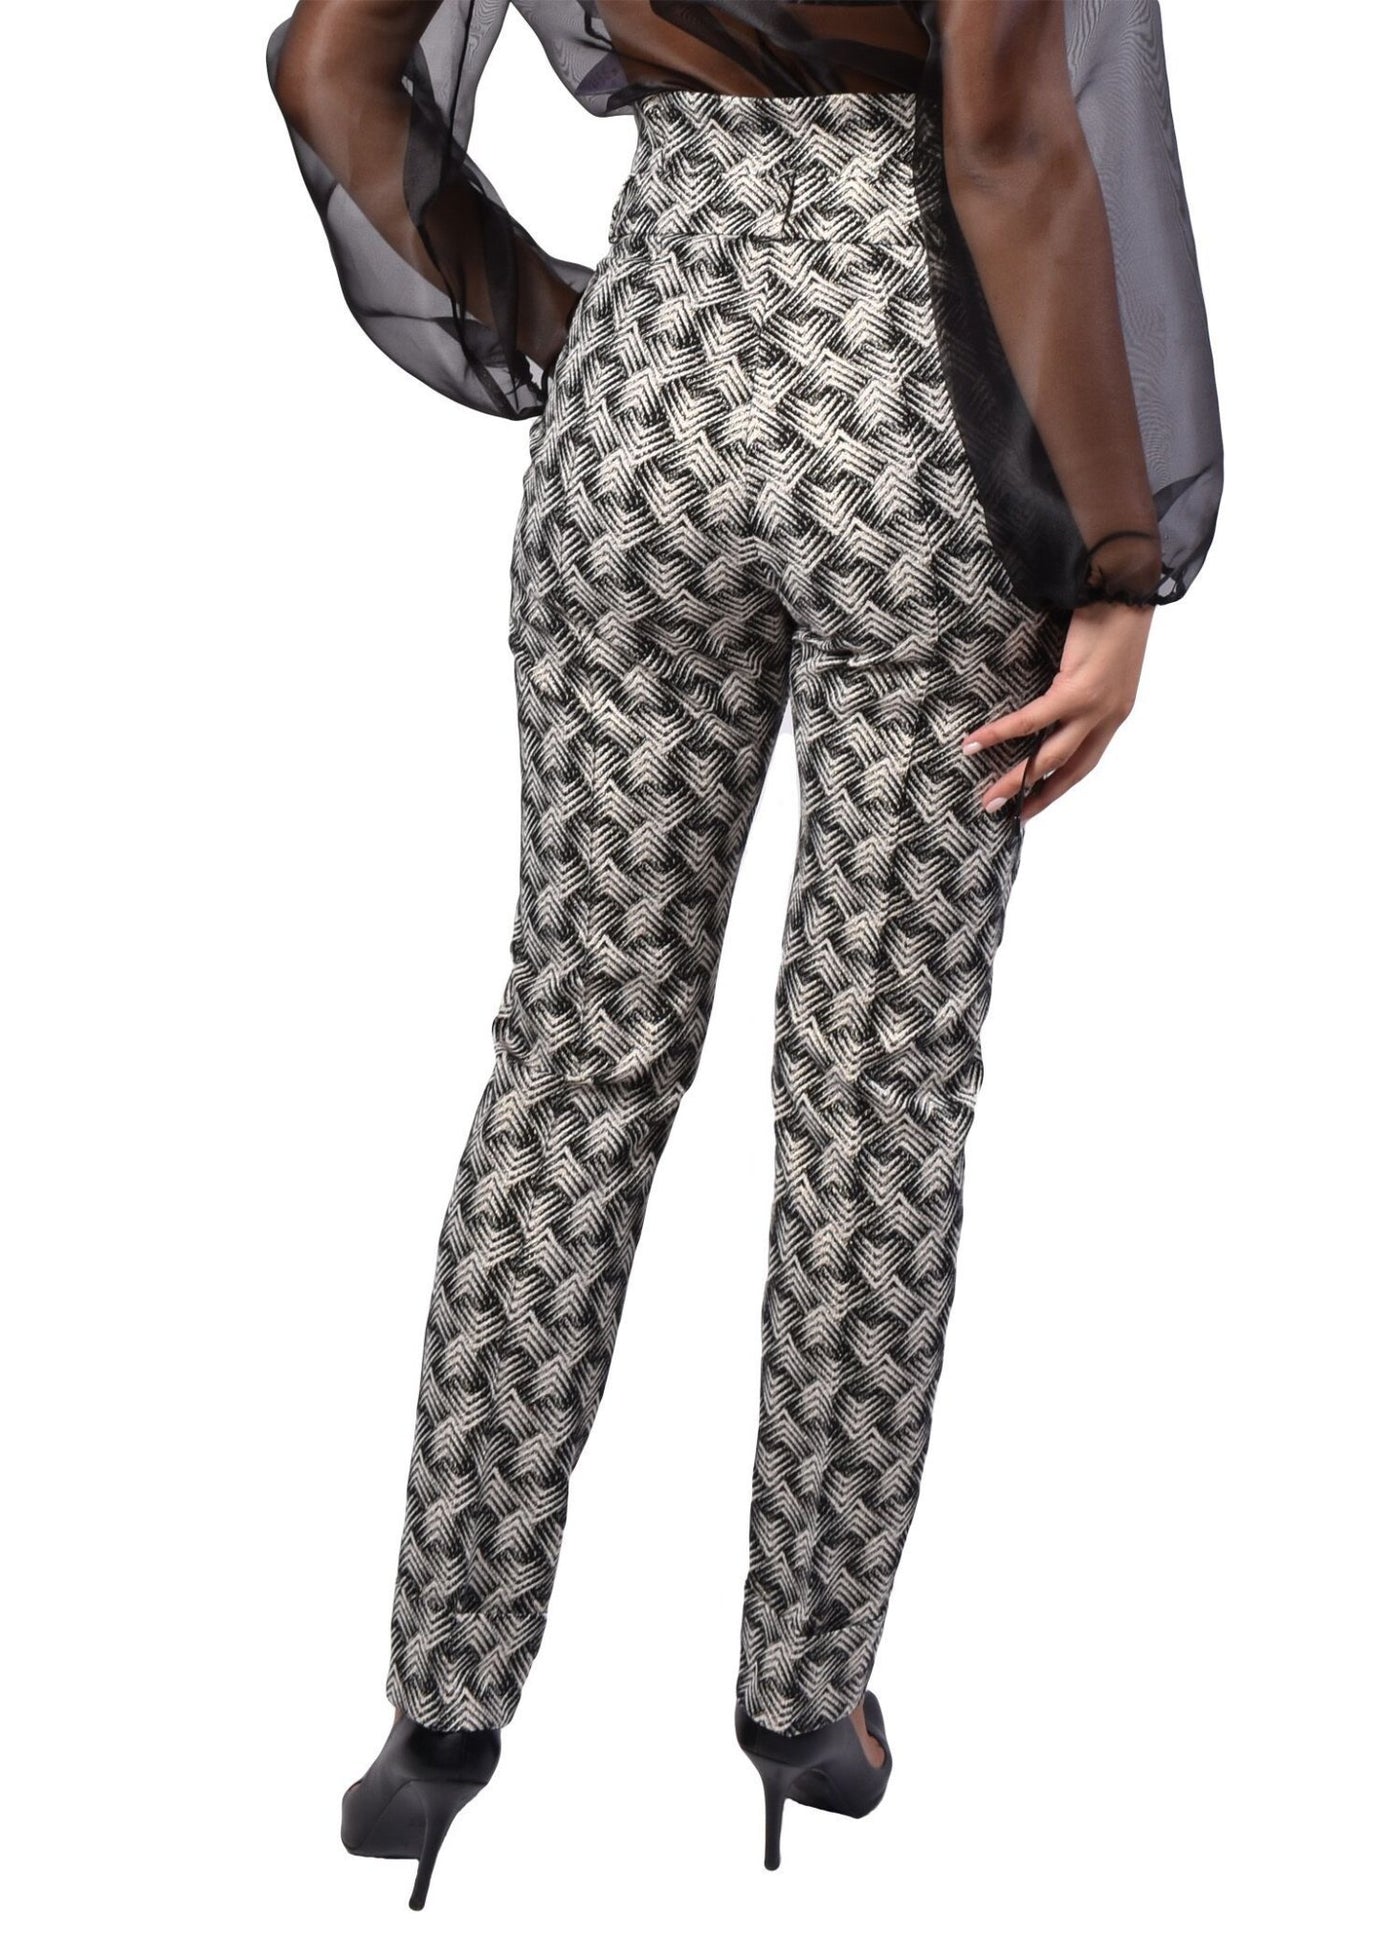 Glitter Jacquard Pants - The Clothing LoungeNOPIN